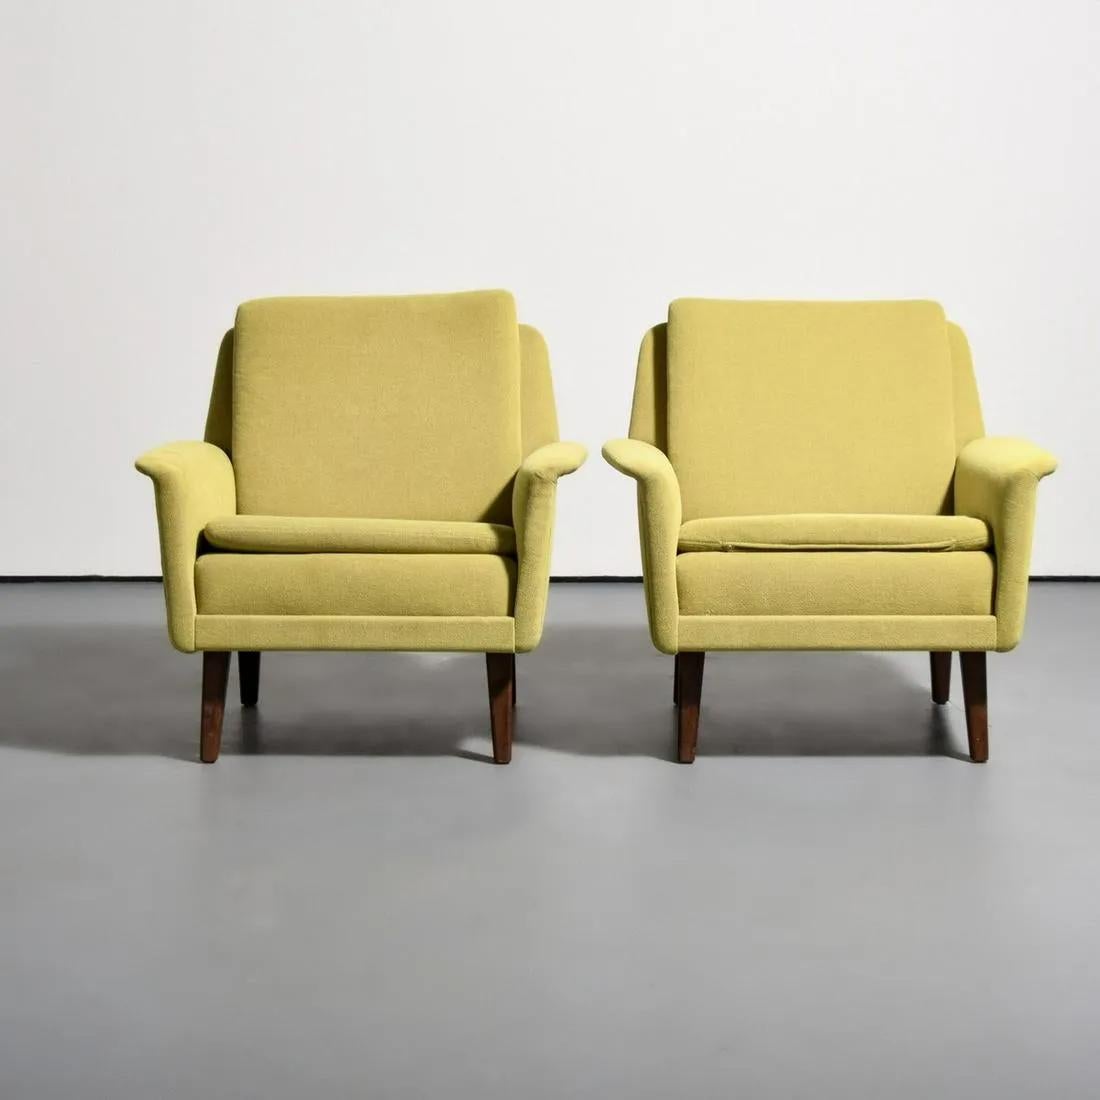 Folke Ohlsson for Fritz Hansen MCM Lounge Chair in Green Upholstery, a Pair For Sale 13